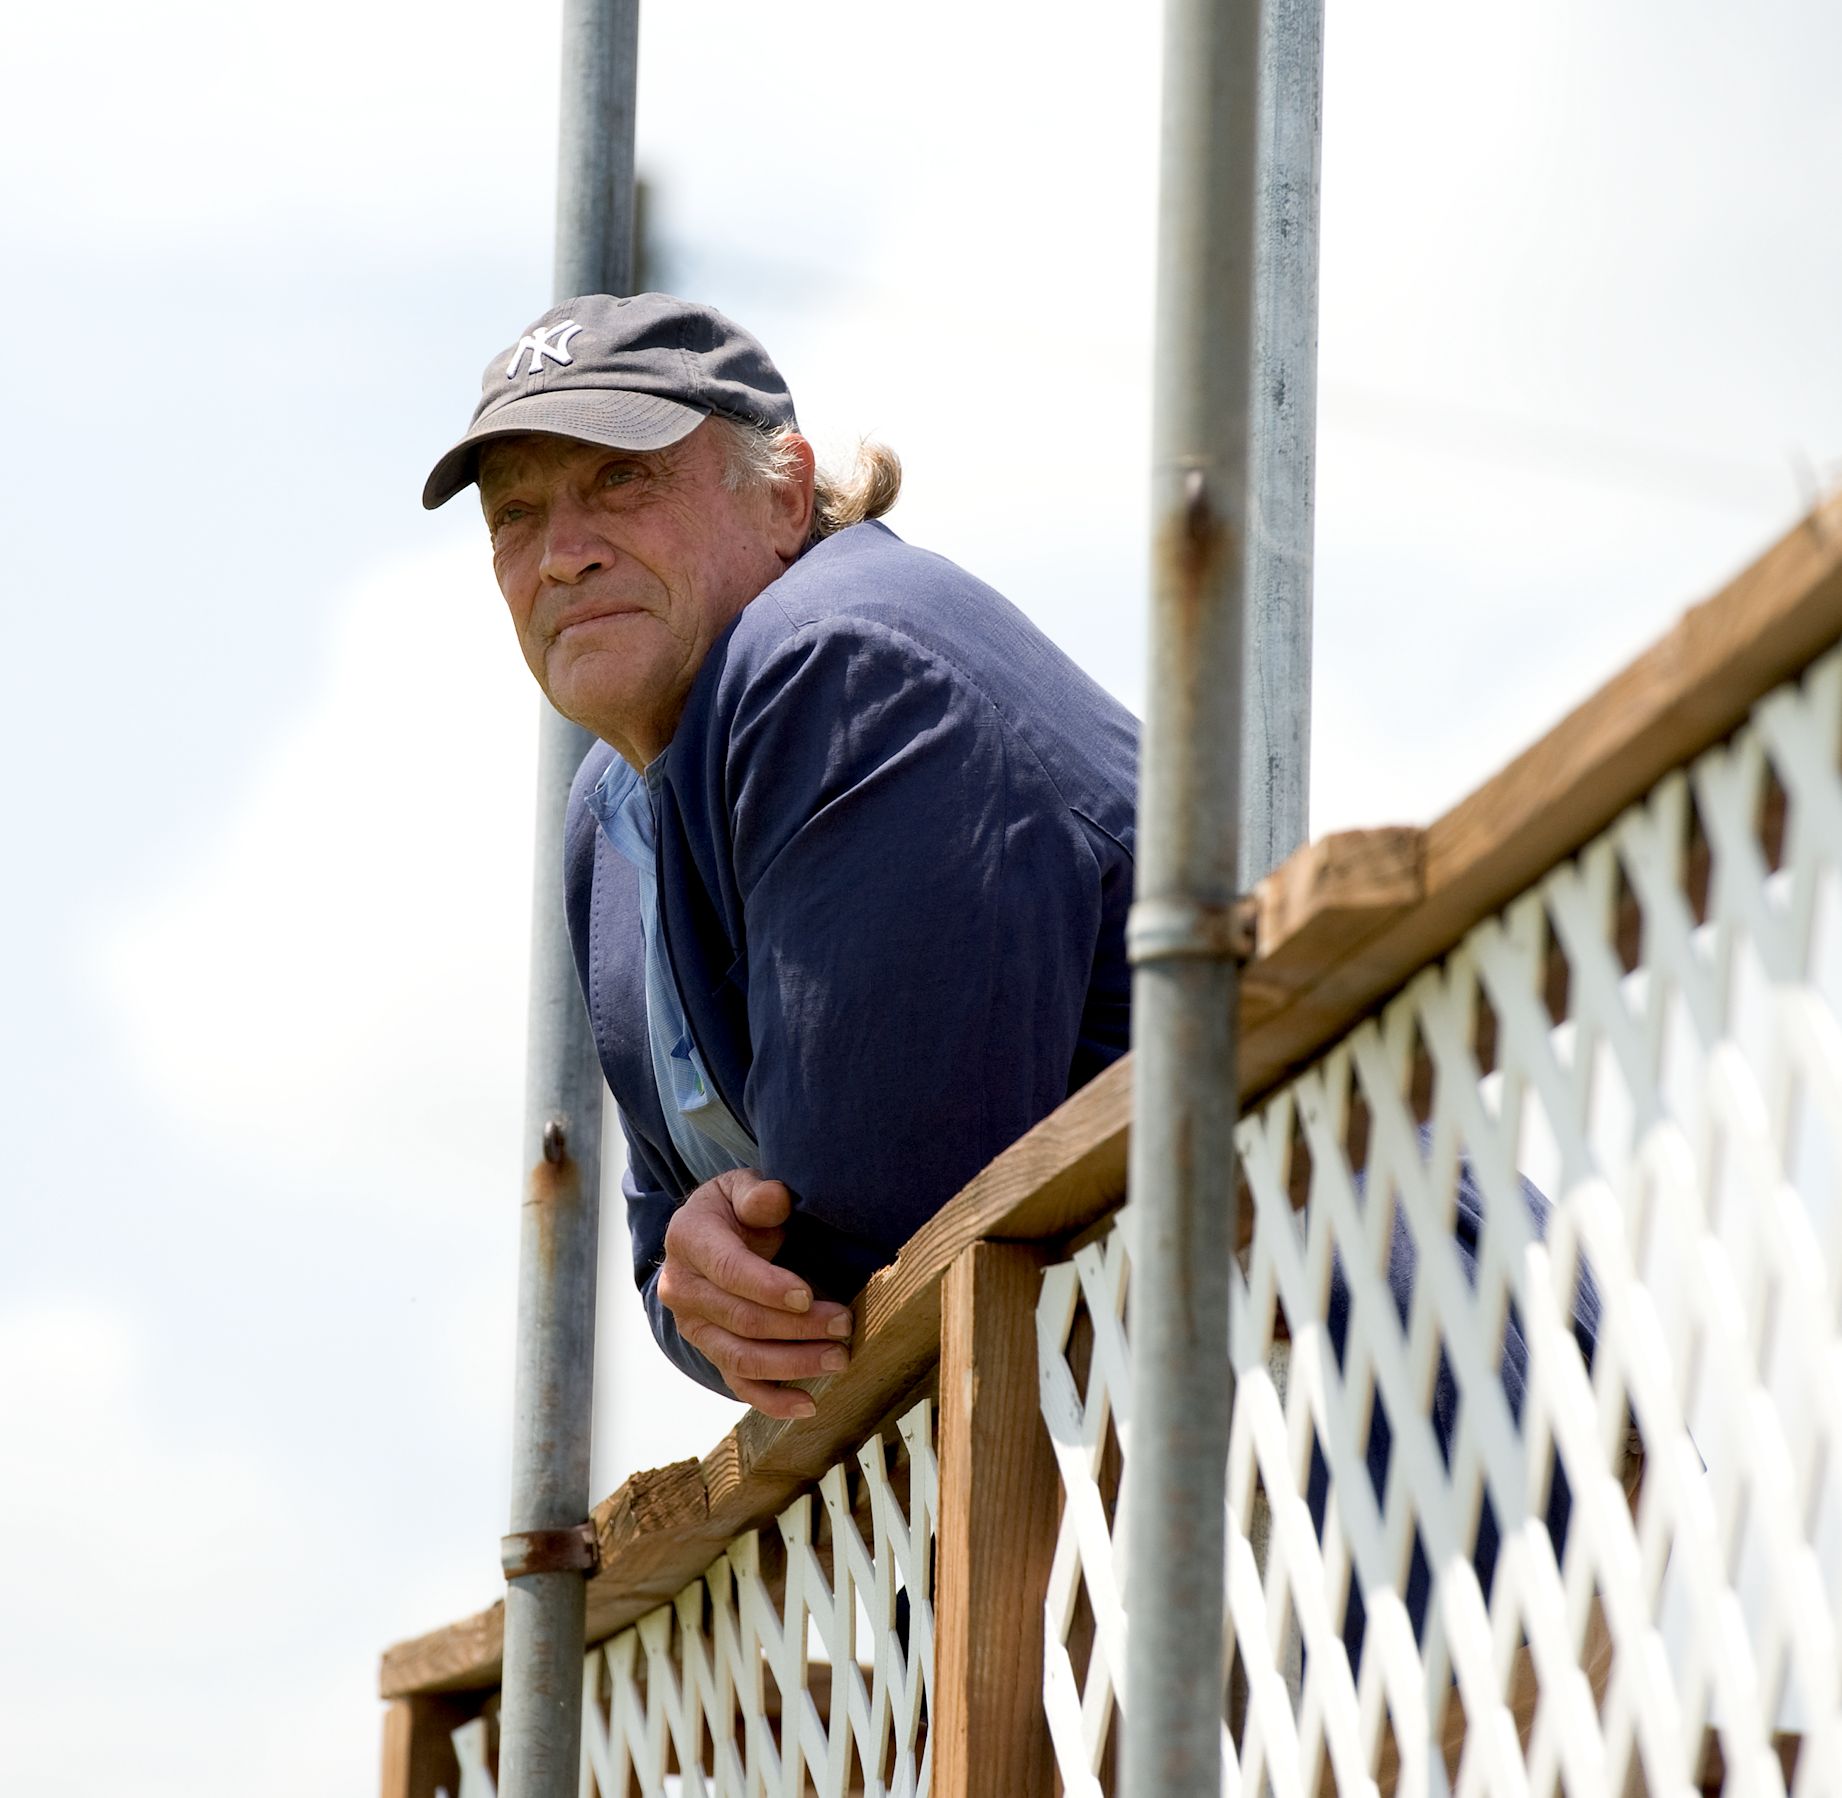 Tom Voss watches Sharp Island win from the infield stand (Tod Marks)